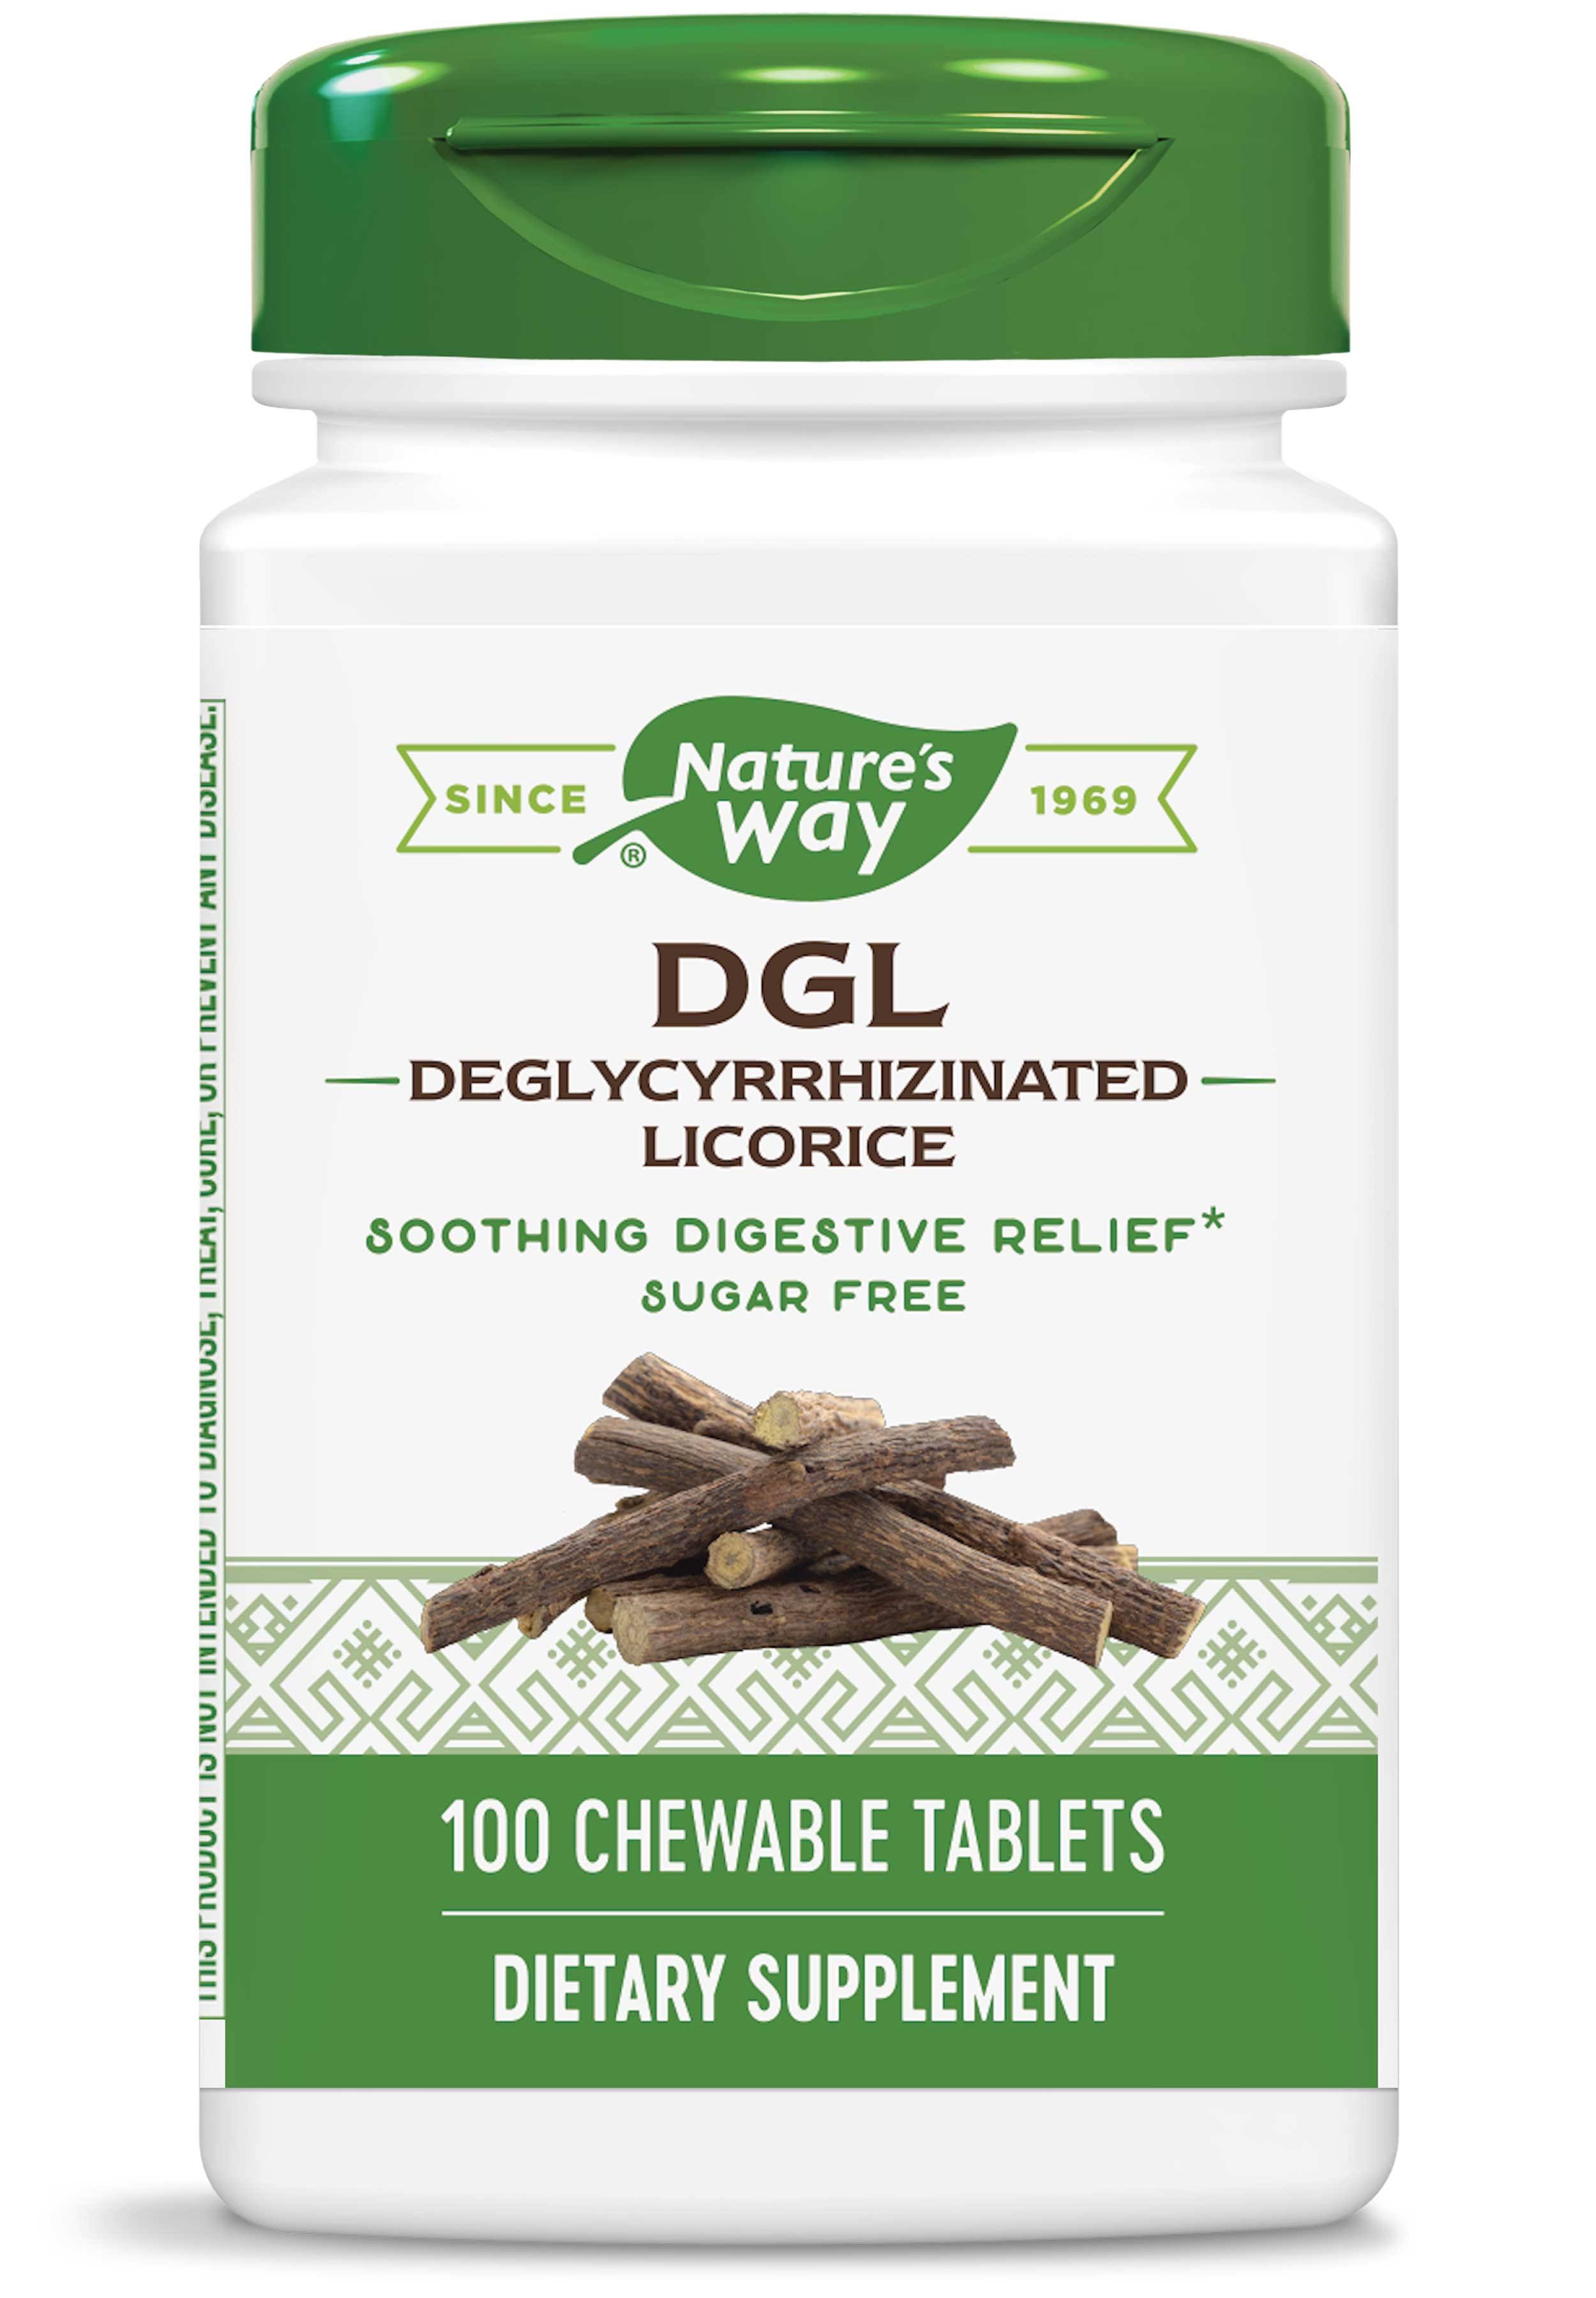 Enzymatic Therapy DGL Deglycyrrhizinated Licorice - 100 Chewable Tablets